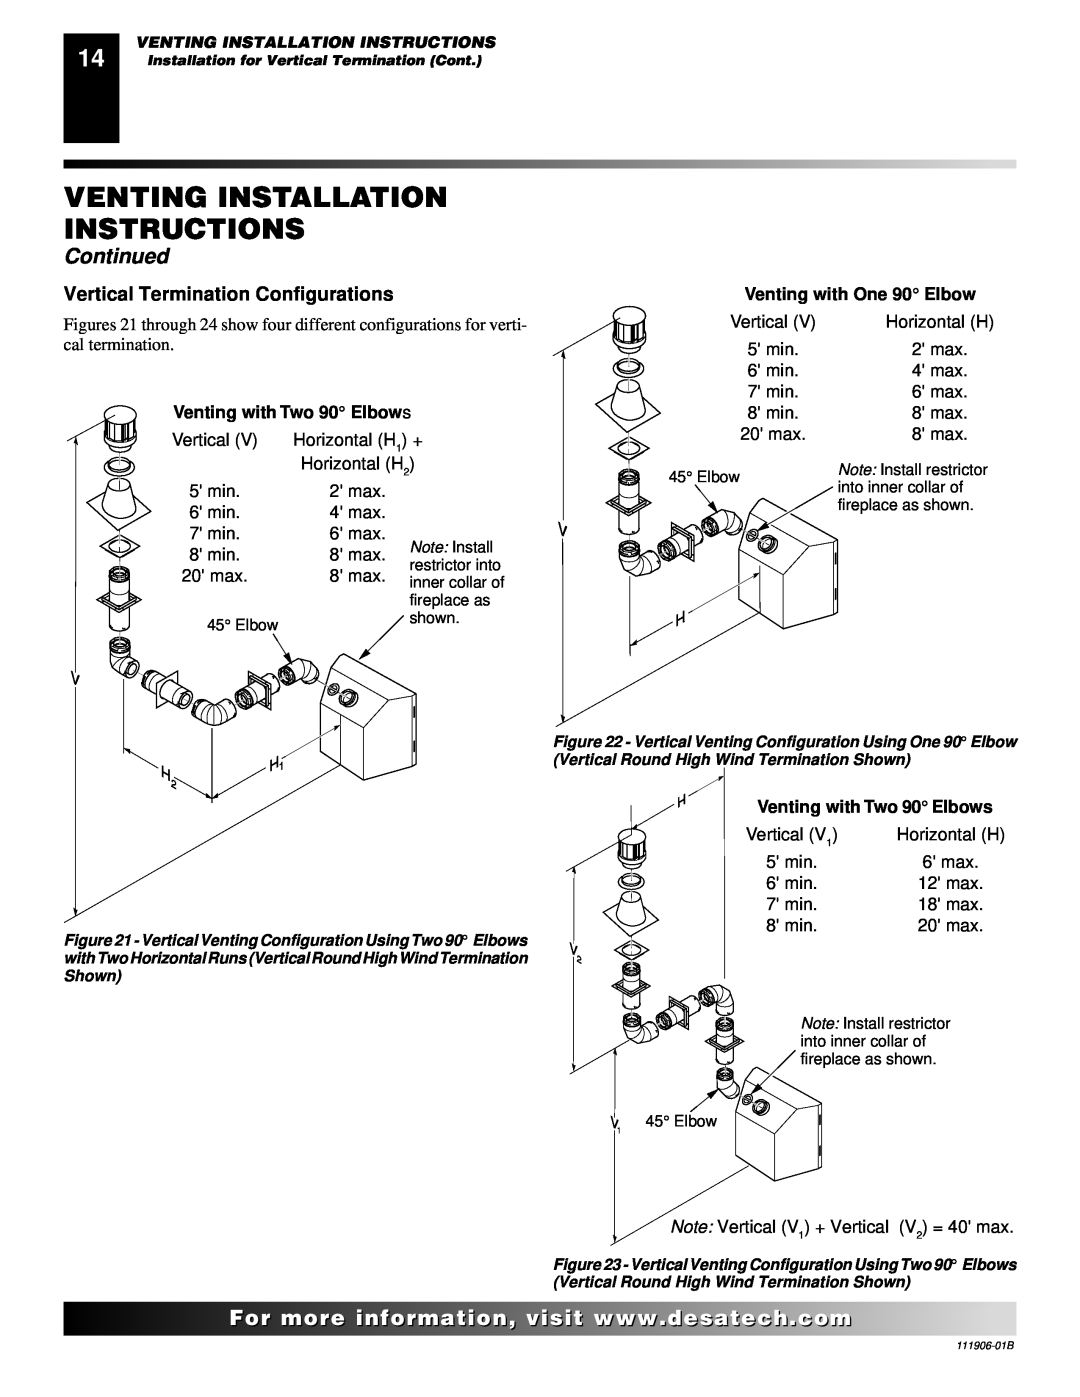 Desa (V)V42PA(1), CHDV42NRA Venting Installation Instructions, Continued, Vertical Termination Configurations, Elbows 